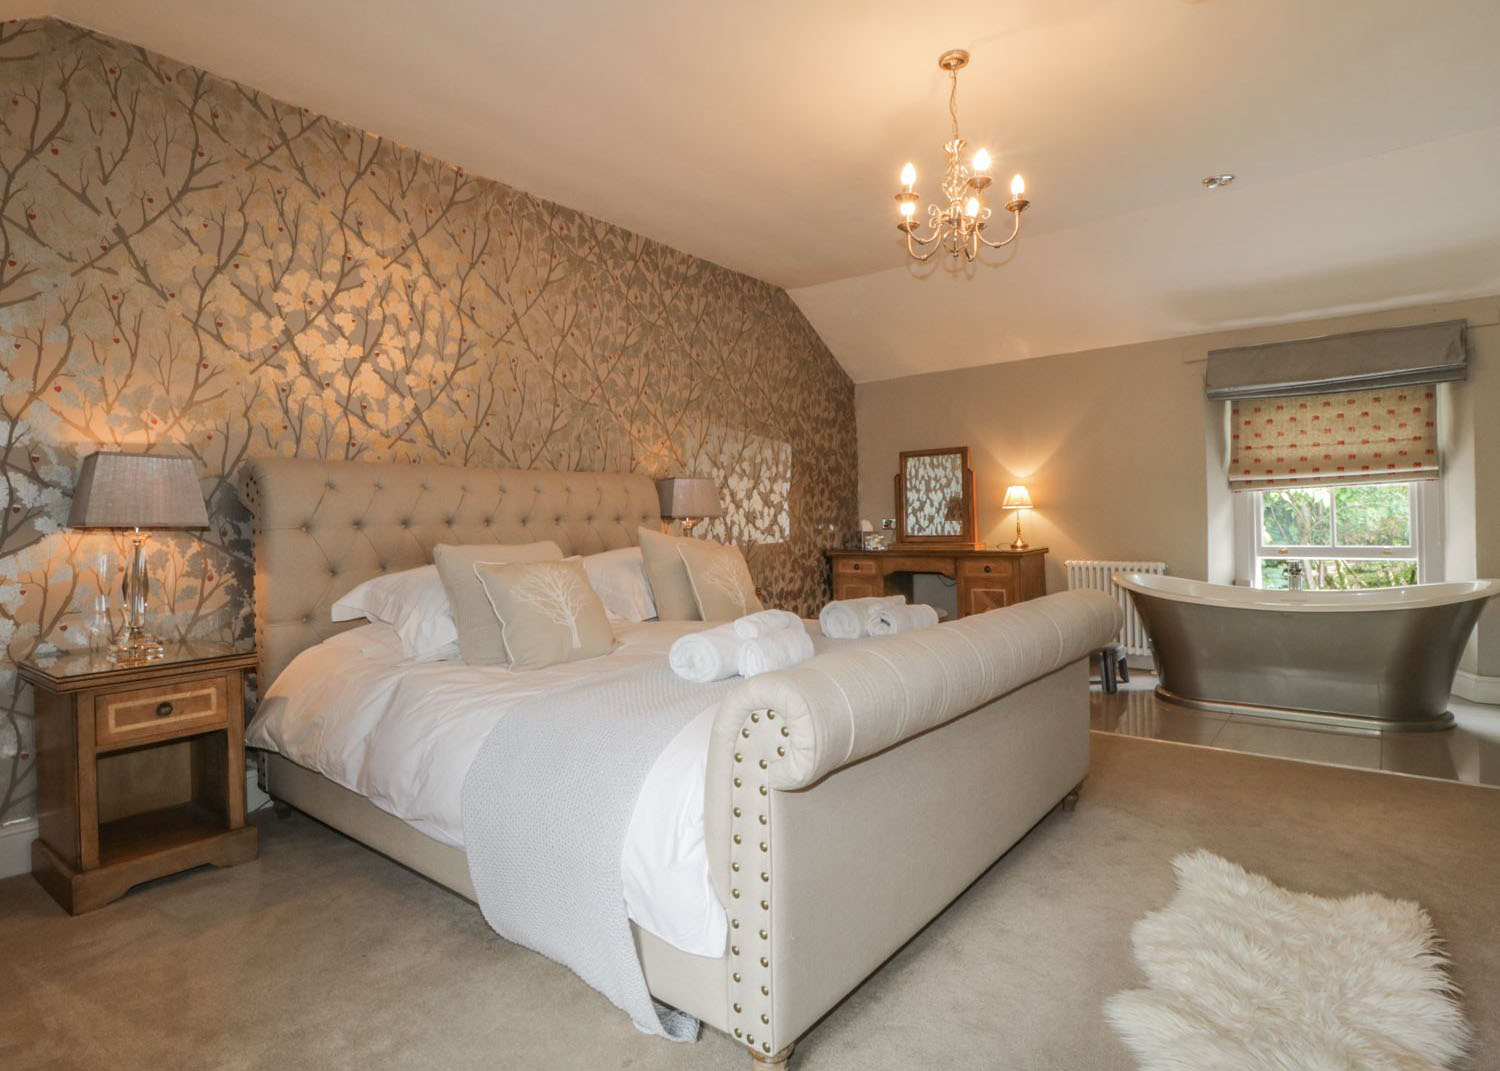 Double bed in an elegant bedroom featuring a roll top bath tub and electricals